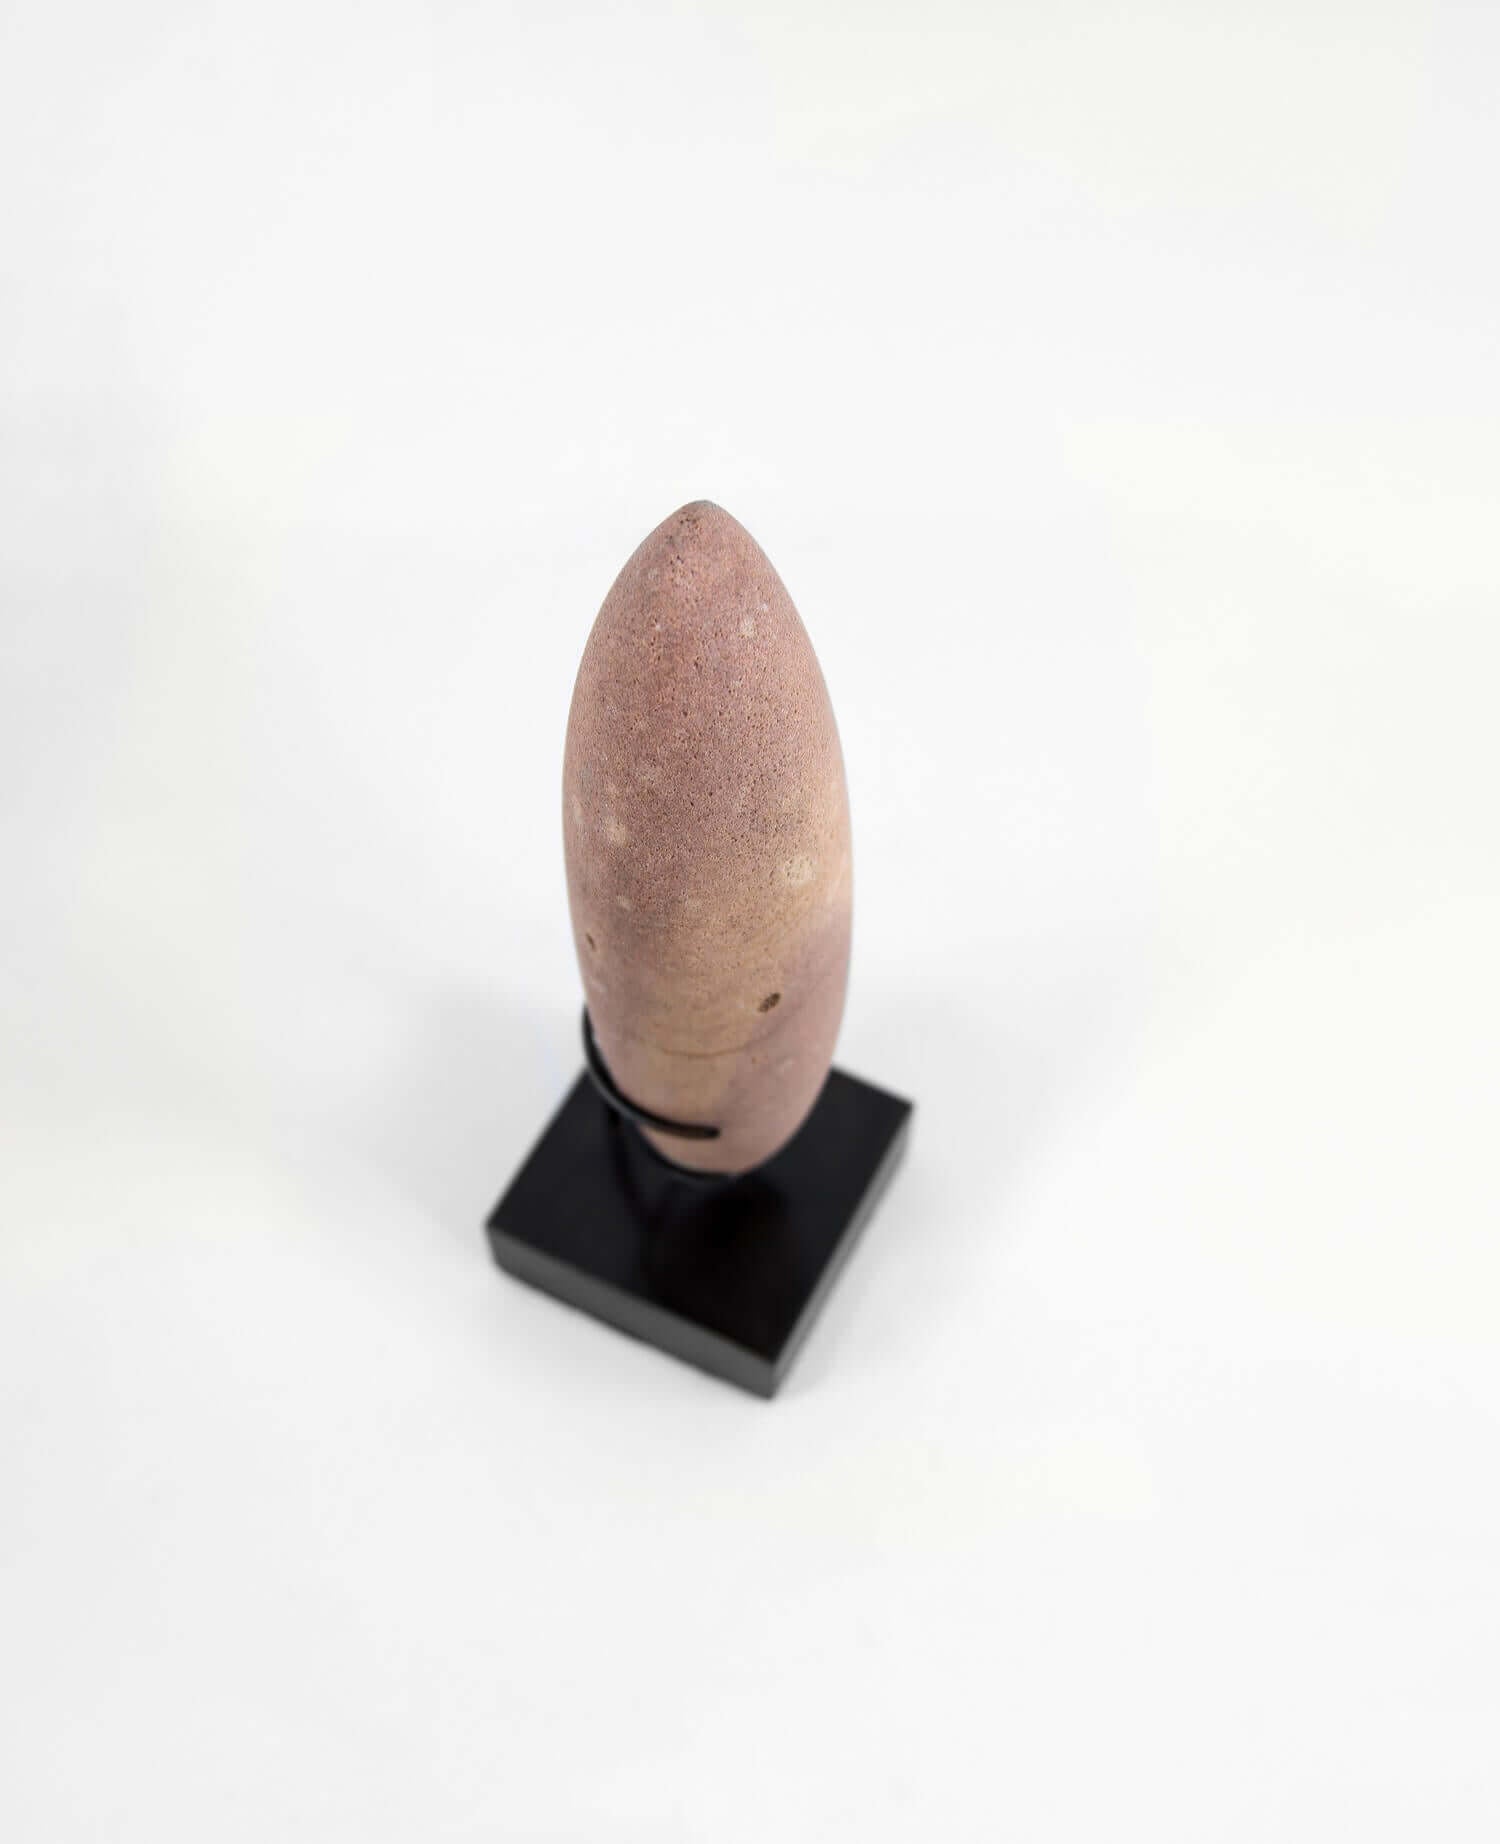 A stunning museum-standard rare authentic Neolithic pestle measuring 247mm created by an ancient hand